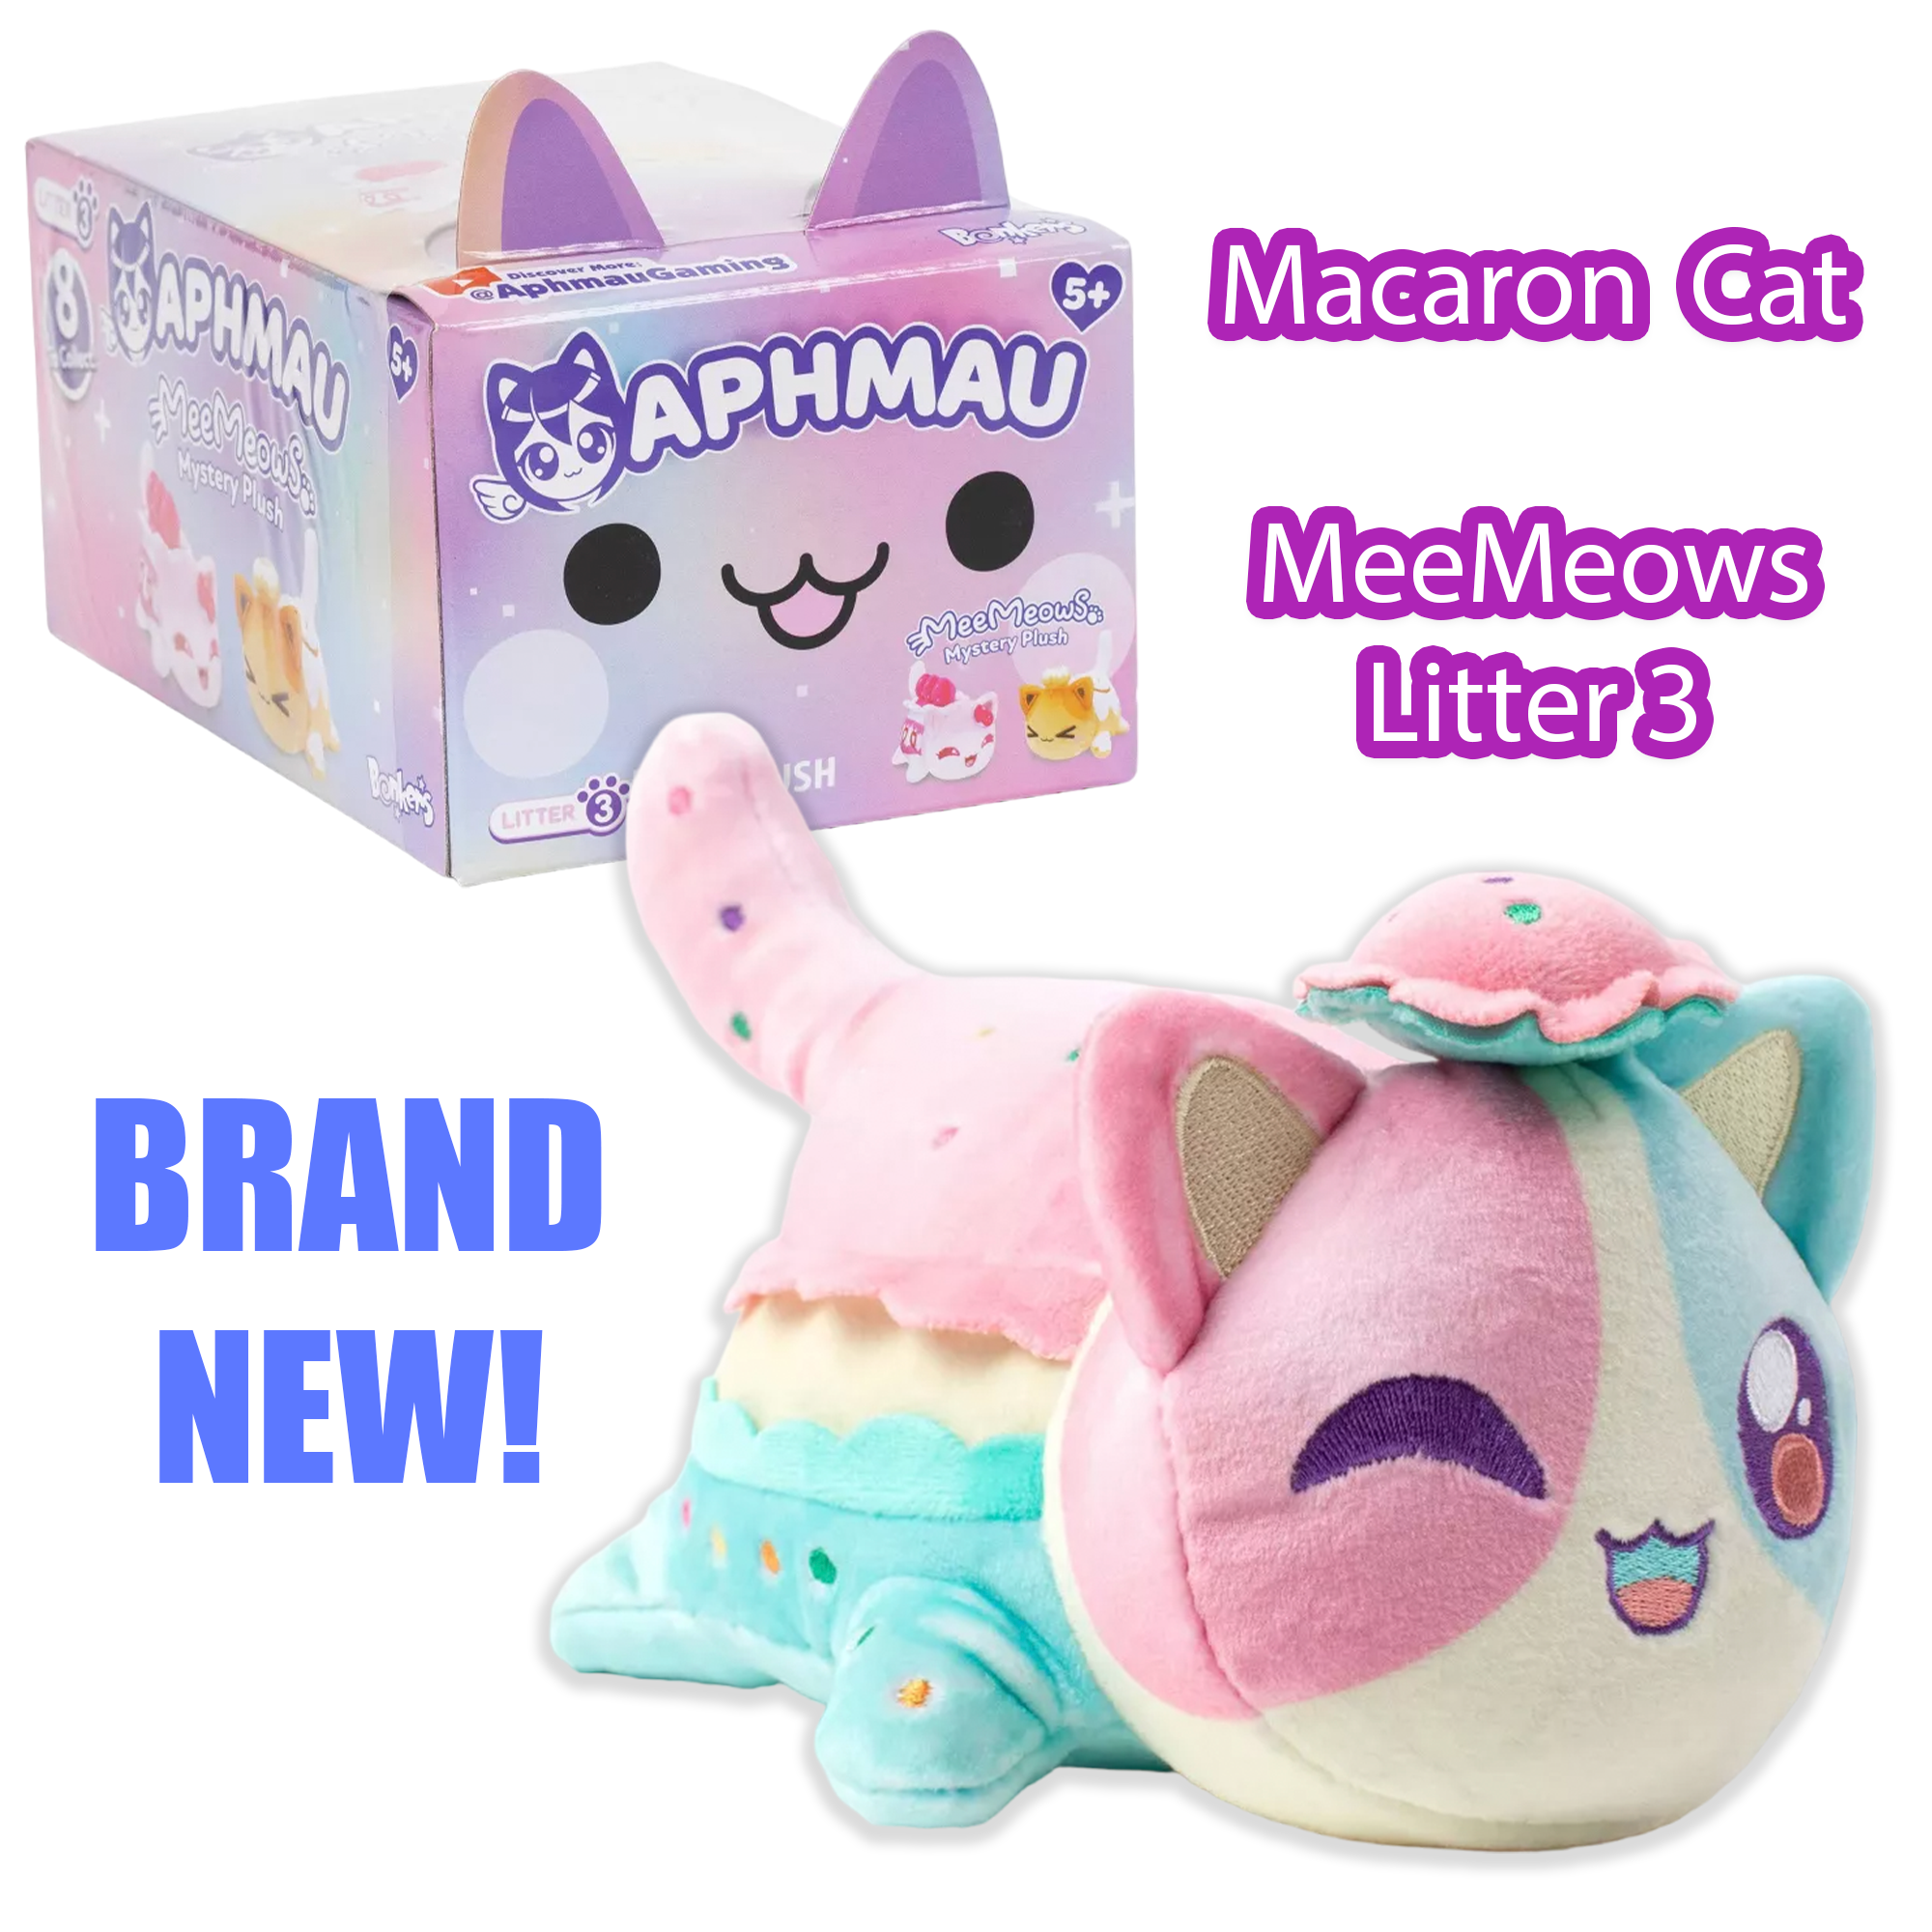 MOON CAT - MeeMeows Litter 4 from Aphmau (BRAND NEW) Cute Kitty